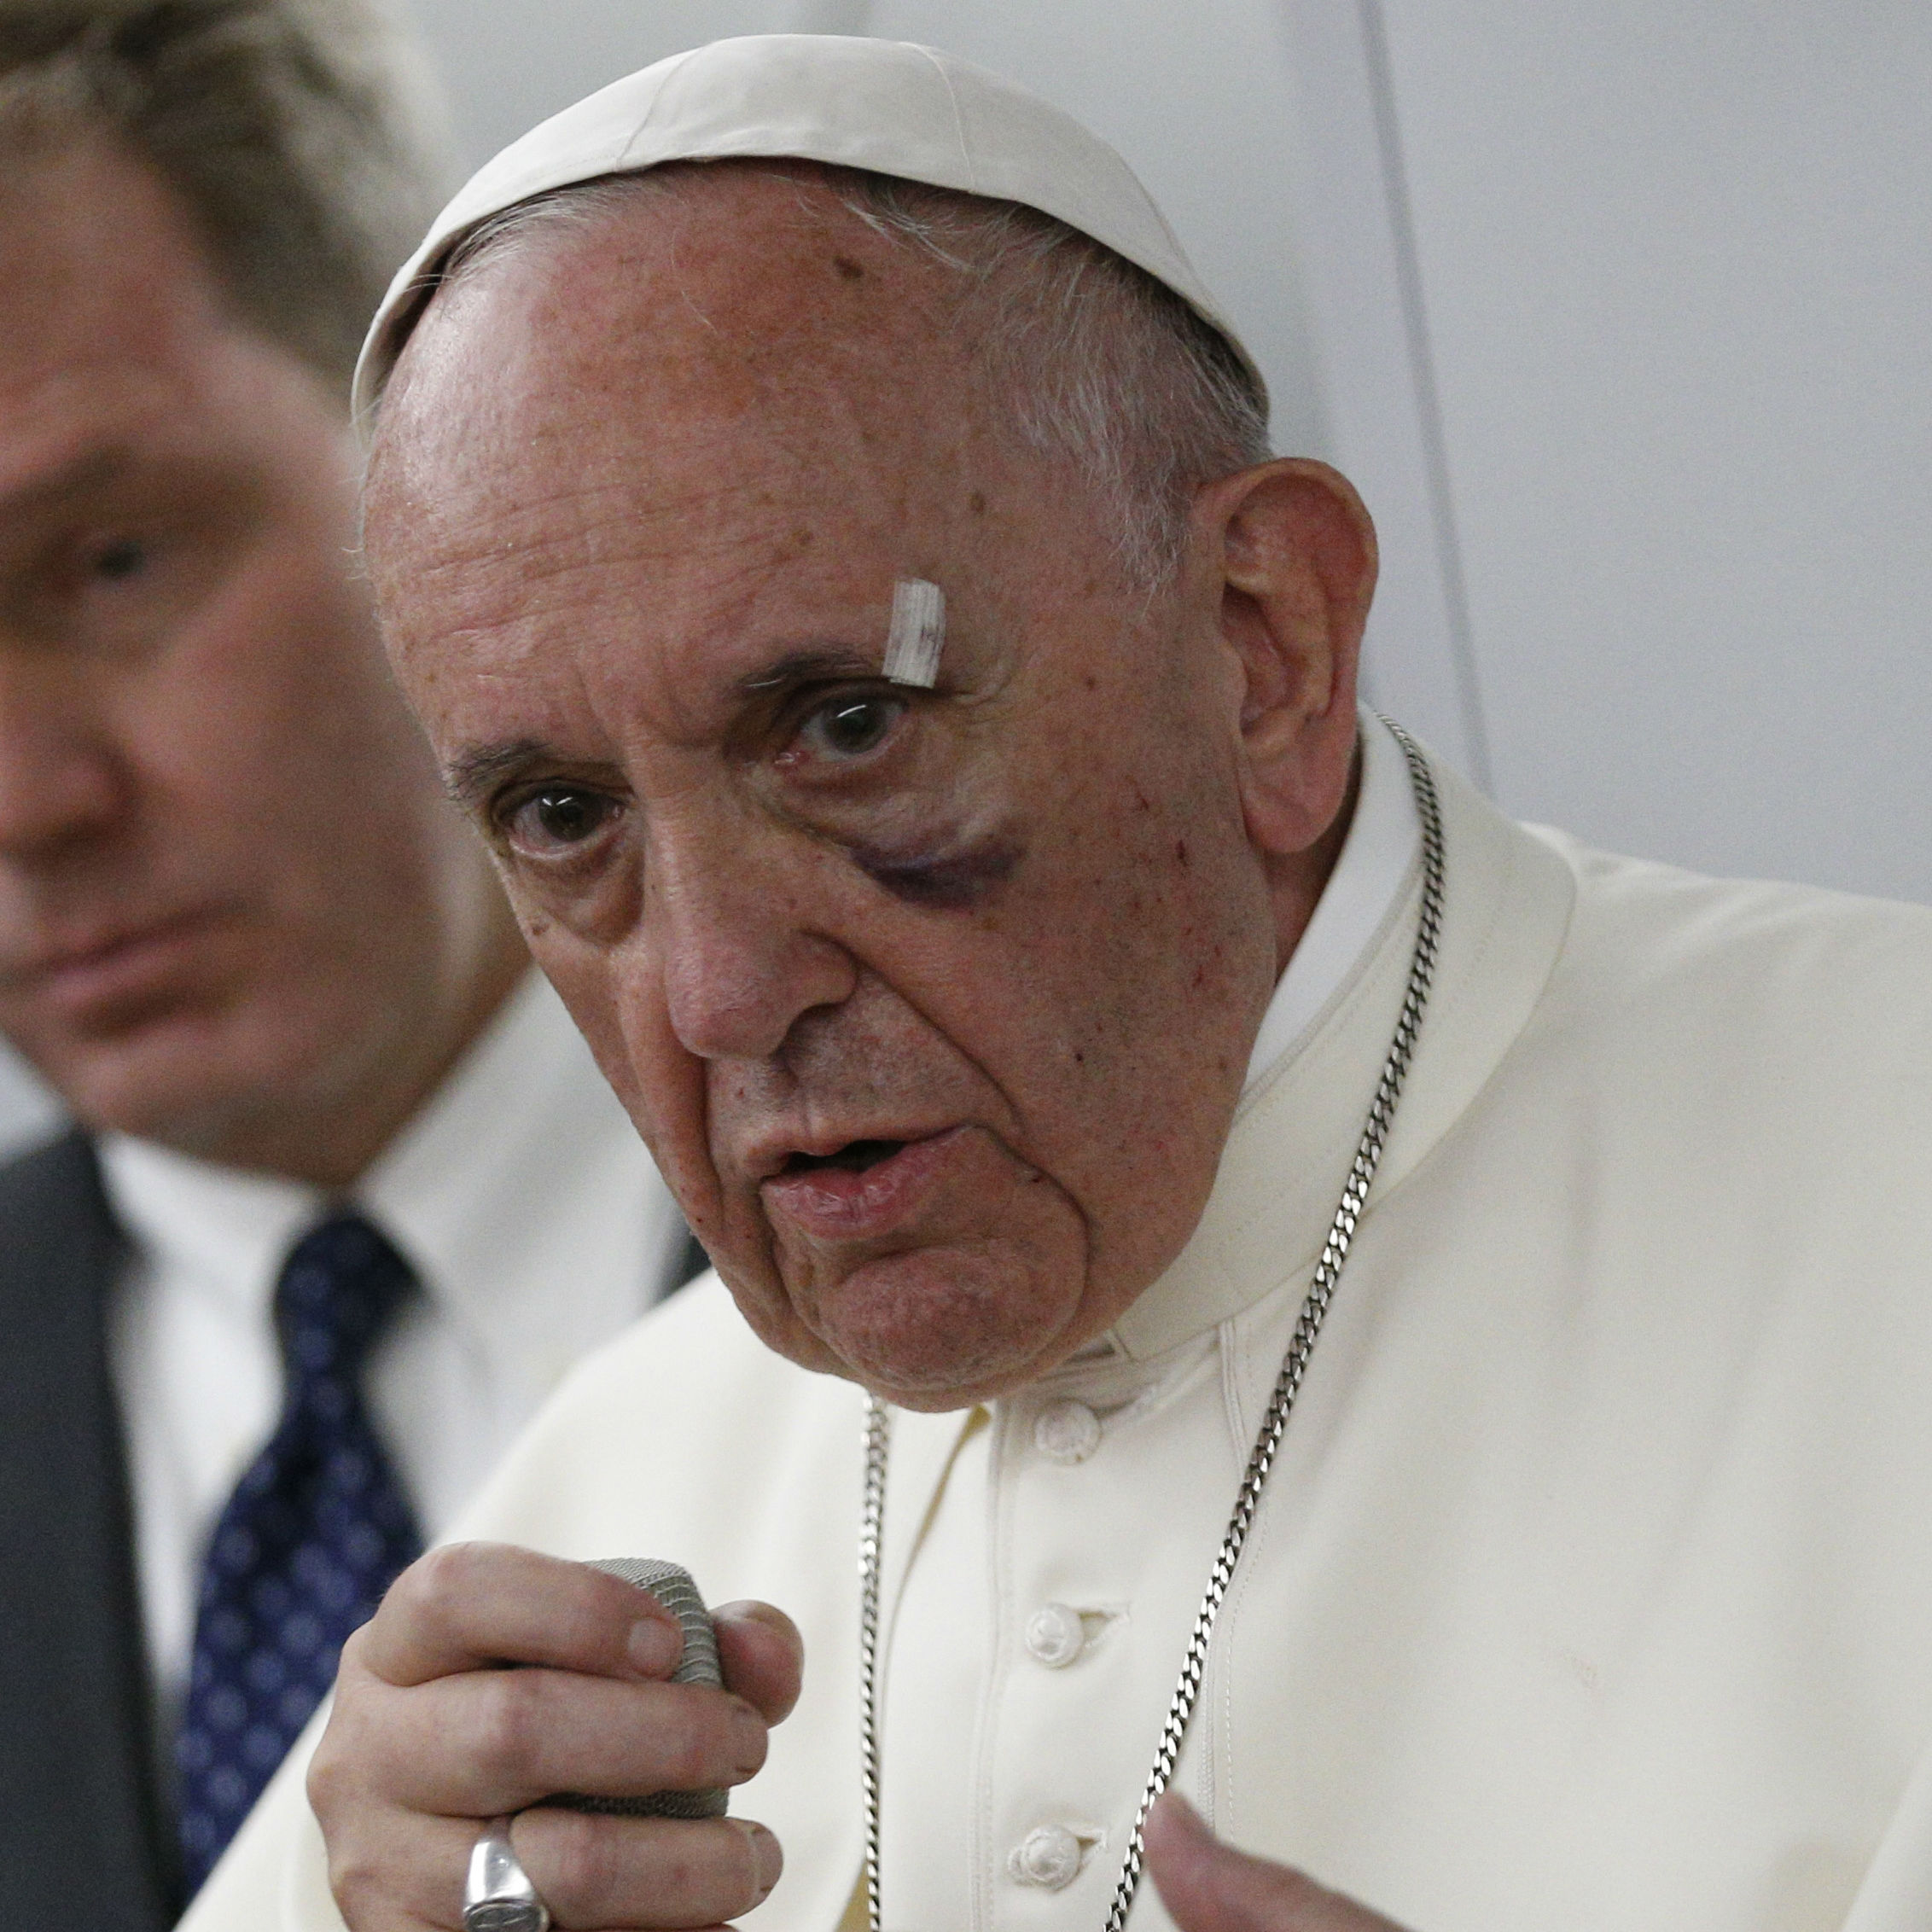 Pope says Trump should rethink DACA as dividing families is not 'pro-life'